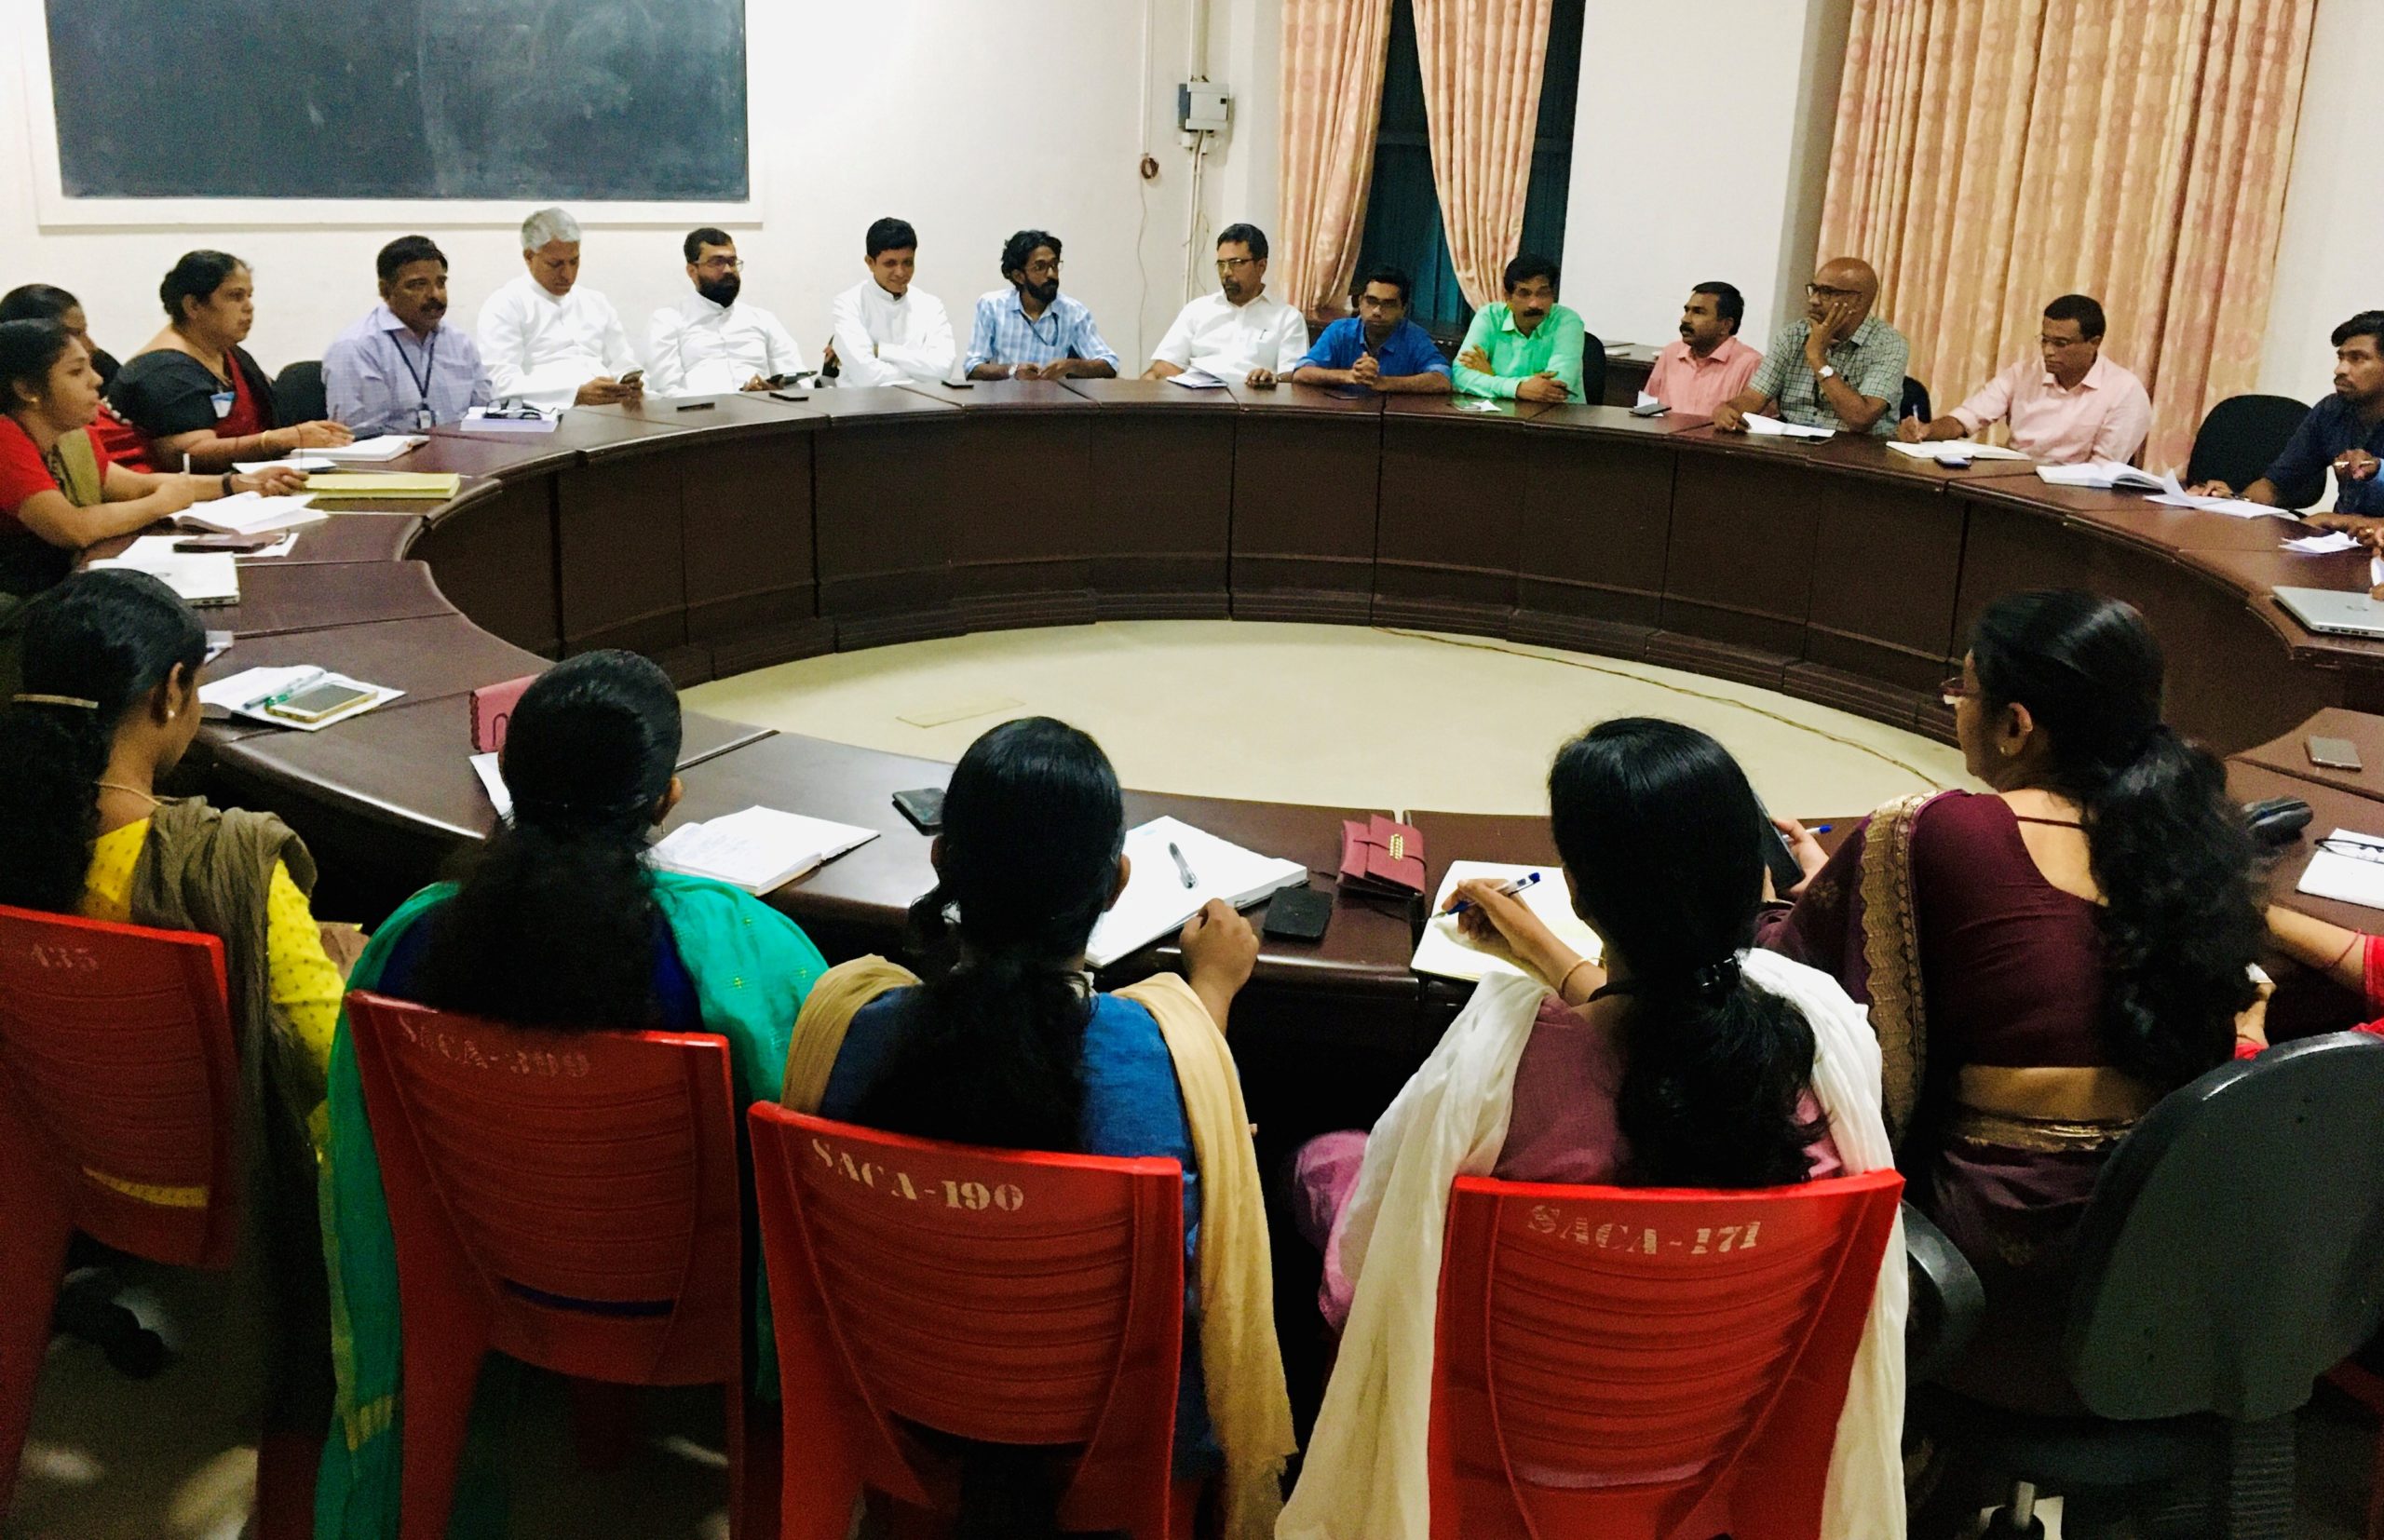 St. Albert’s College (Autonomous) Extended Executive Meeting, held at 17/03/2020 chaired by Chairman Rev. Fr. Antony Arackal